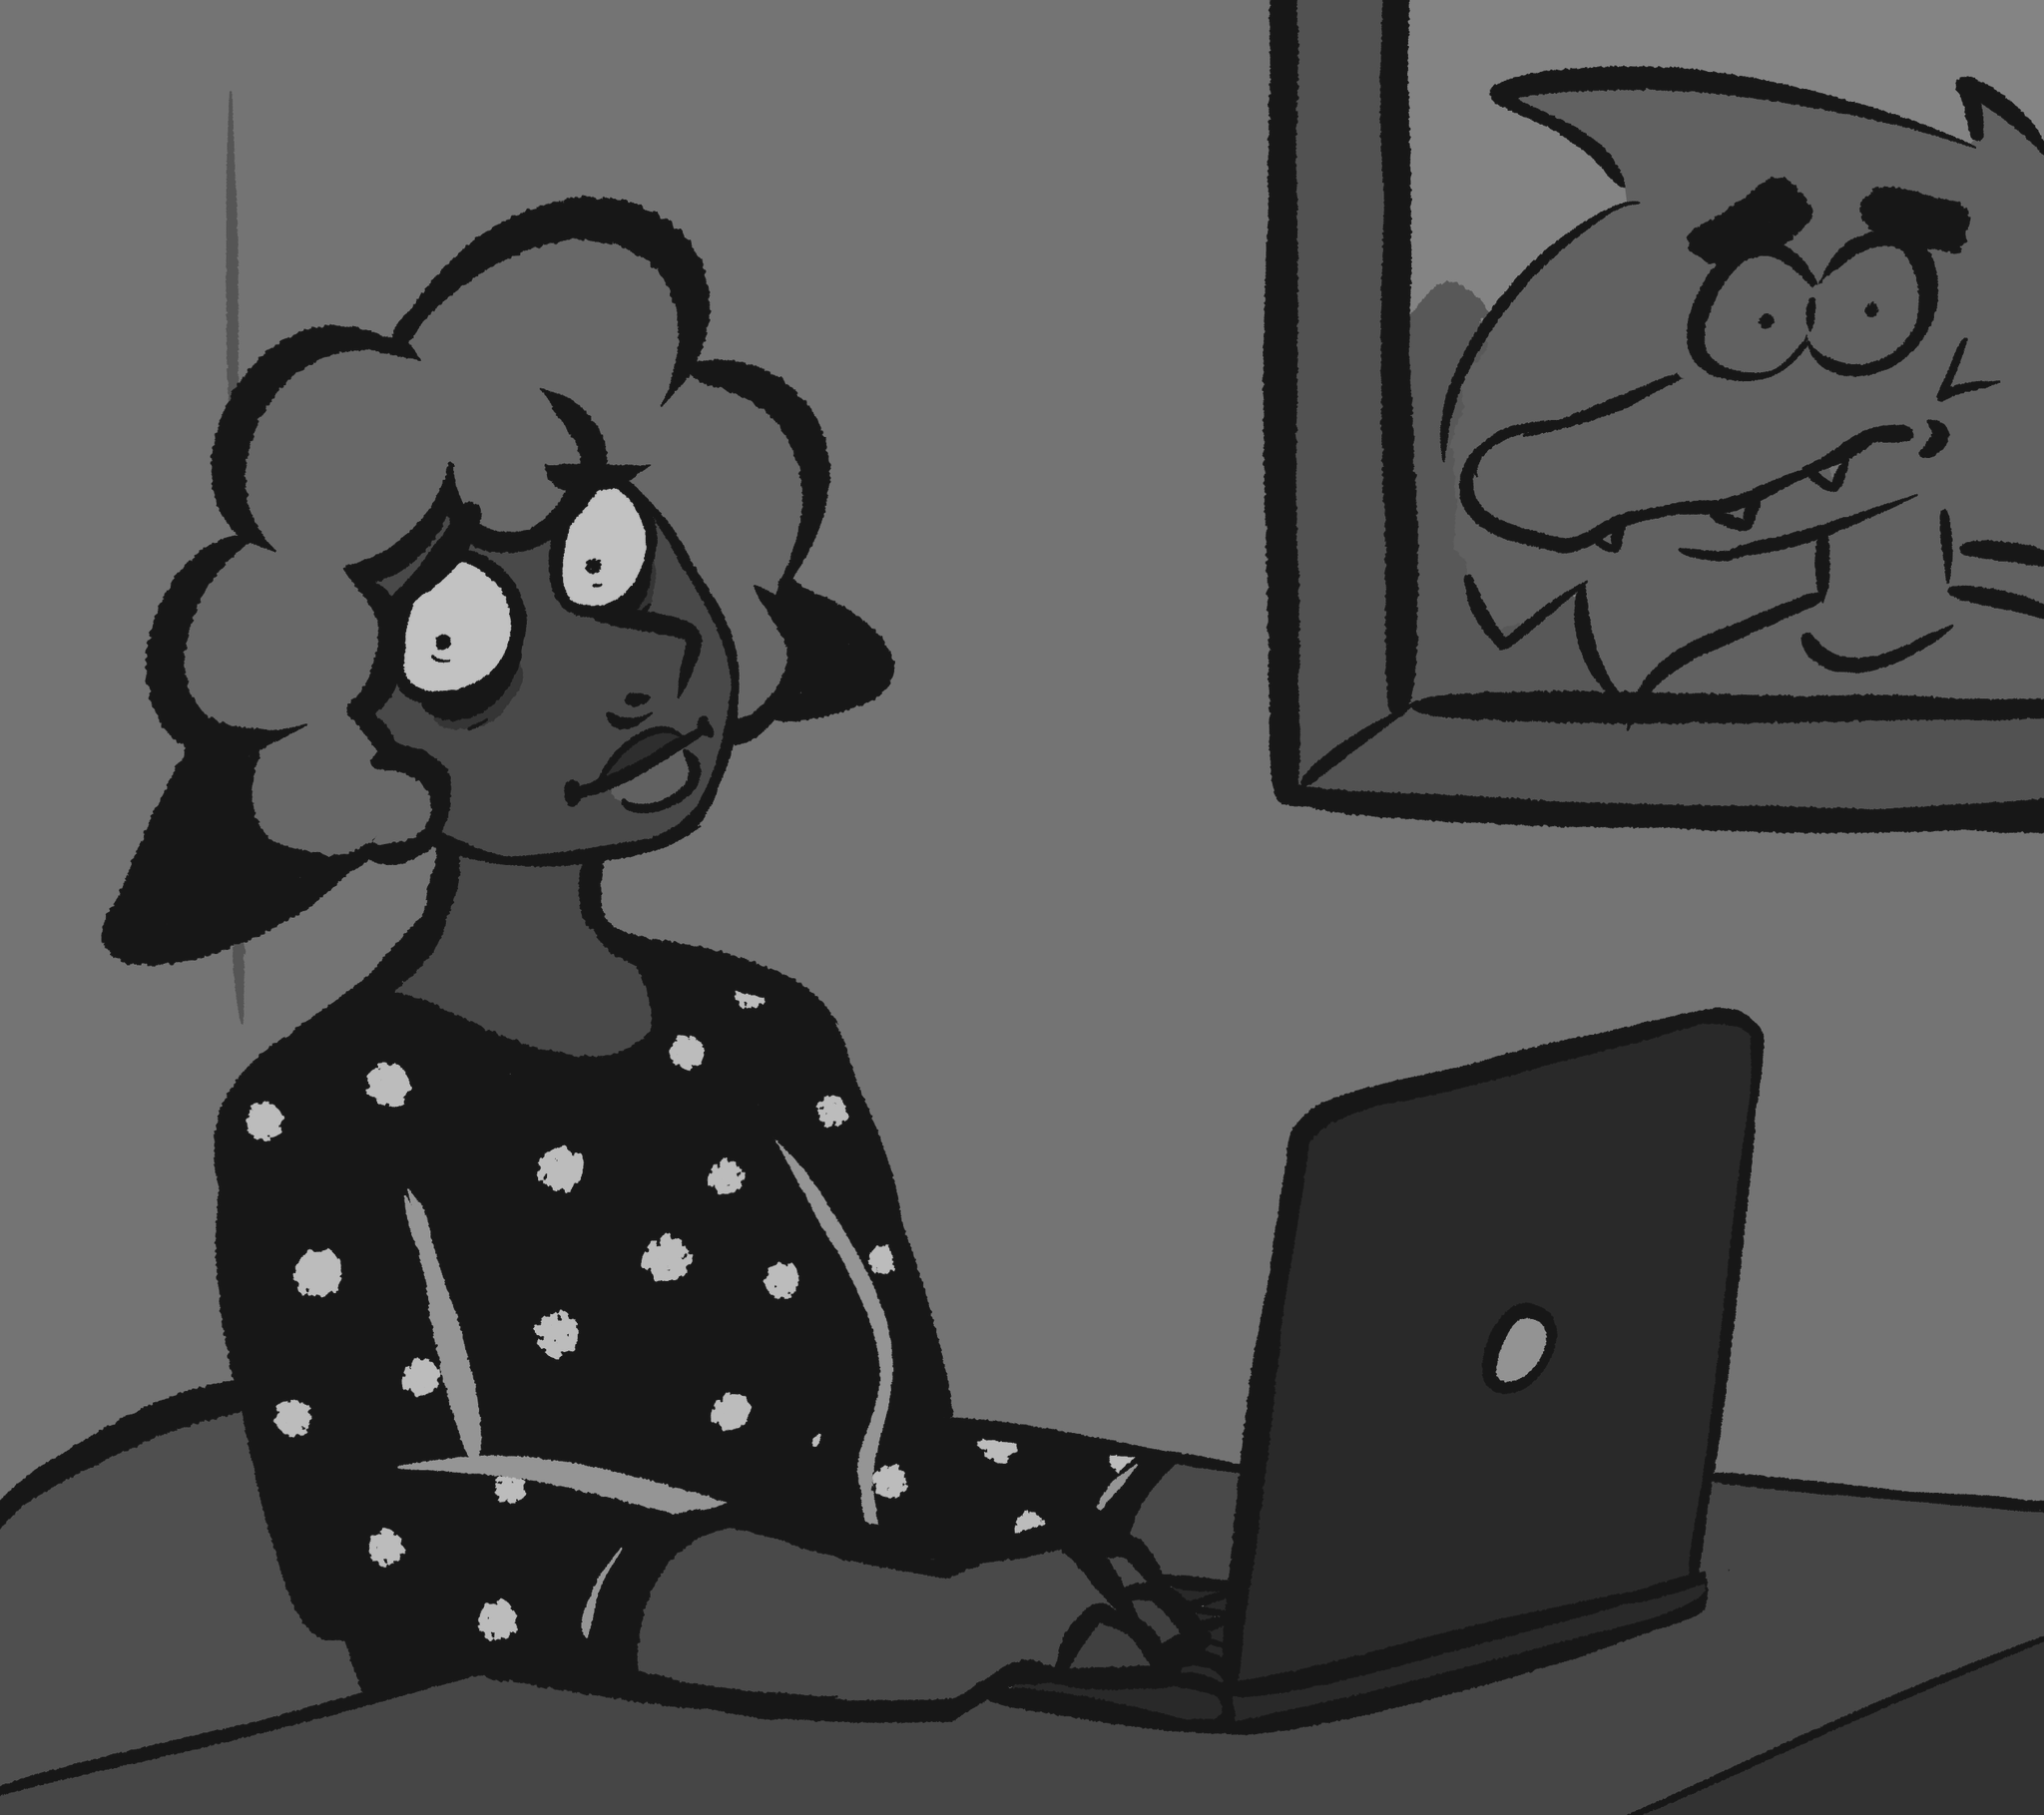 An anthropomorphic sheep sits at a computer, eyes bleary and tired as they stare directly at the viewer in a dimly lit room. Their hand-hooves are on the keyboard, and their head is tilted to the side in tiredness, but they're trying to maintain and upright posture and keep staring as best as they can. A portrait in the room of an anthropomorphic with similar eyes stares at the viewer as well, somewhat creepily.